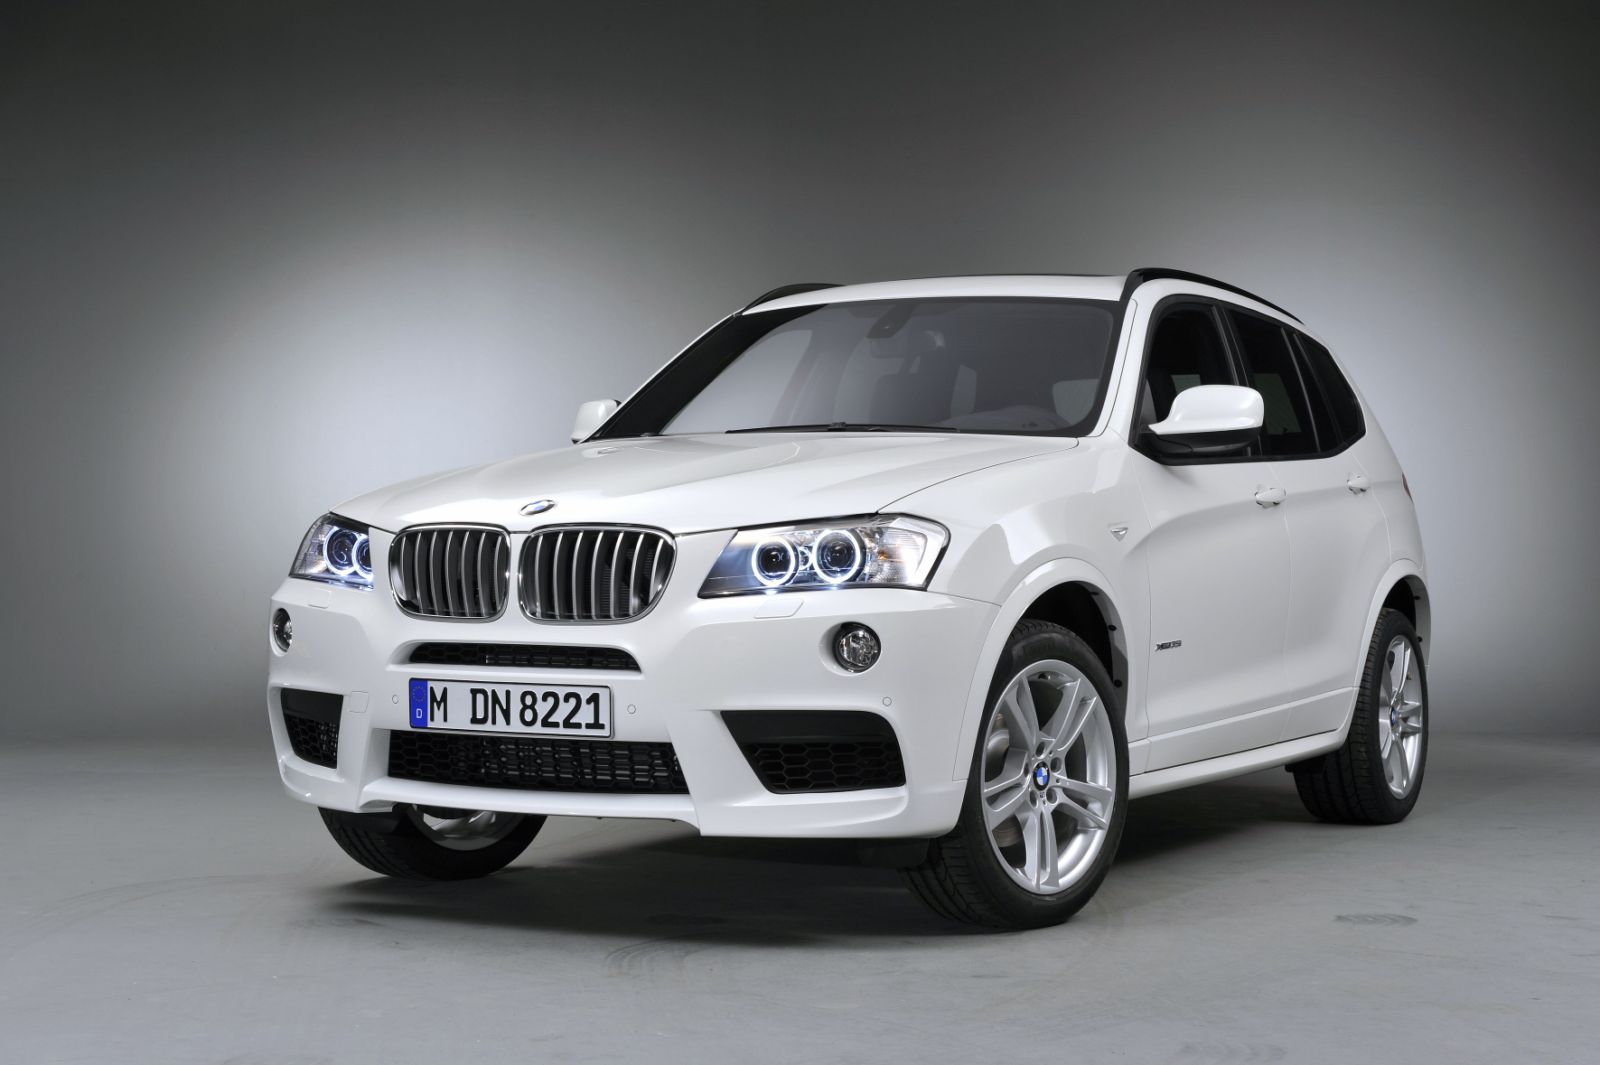 Paris Preview: 2011 BMW X3 with M Sport package